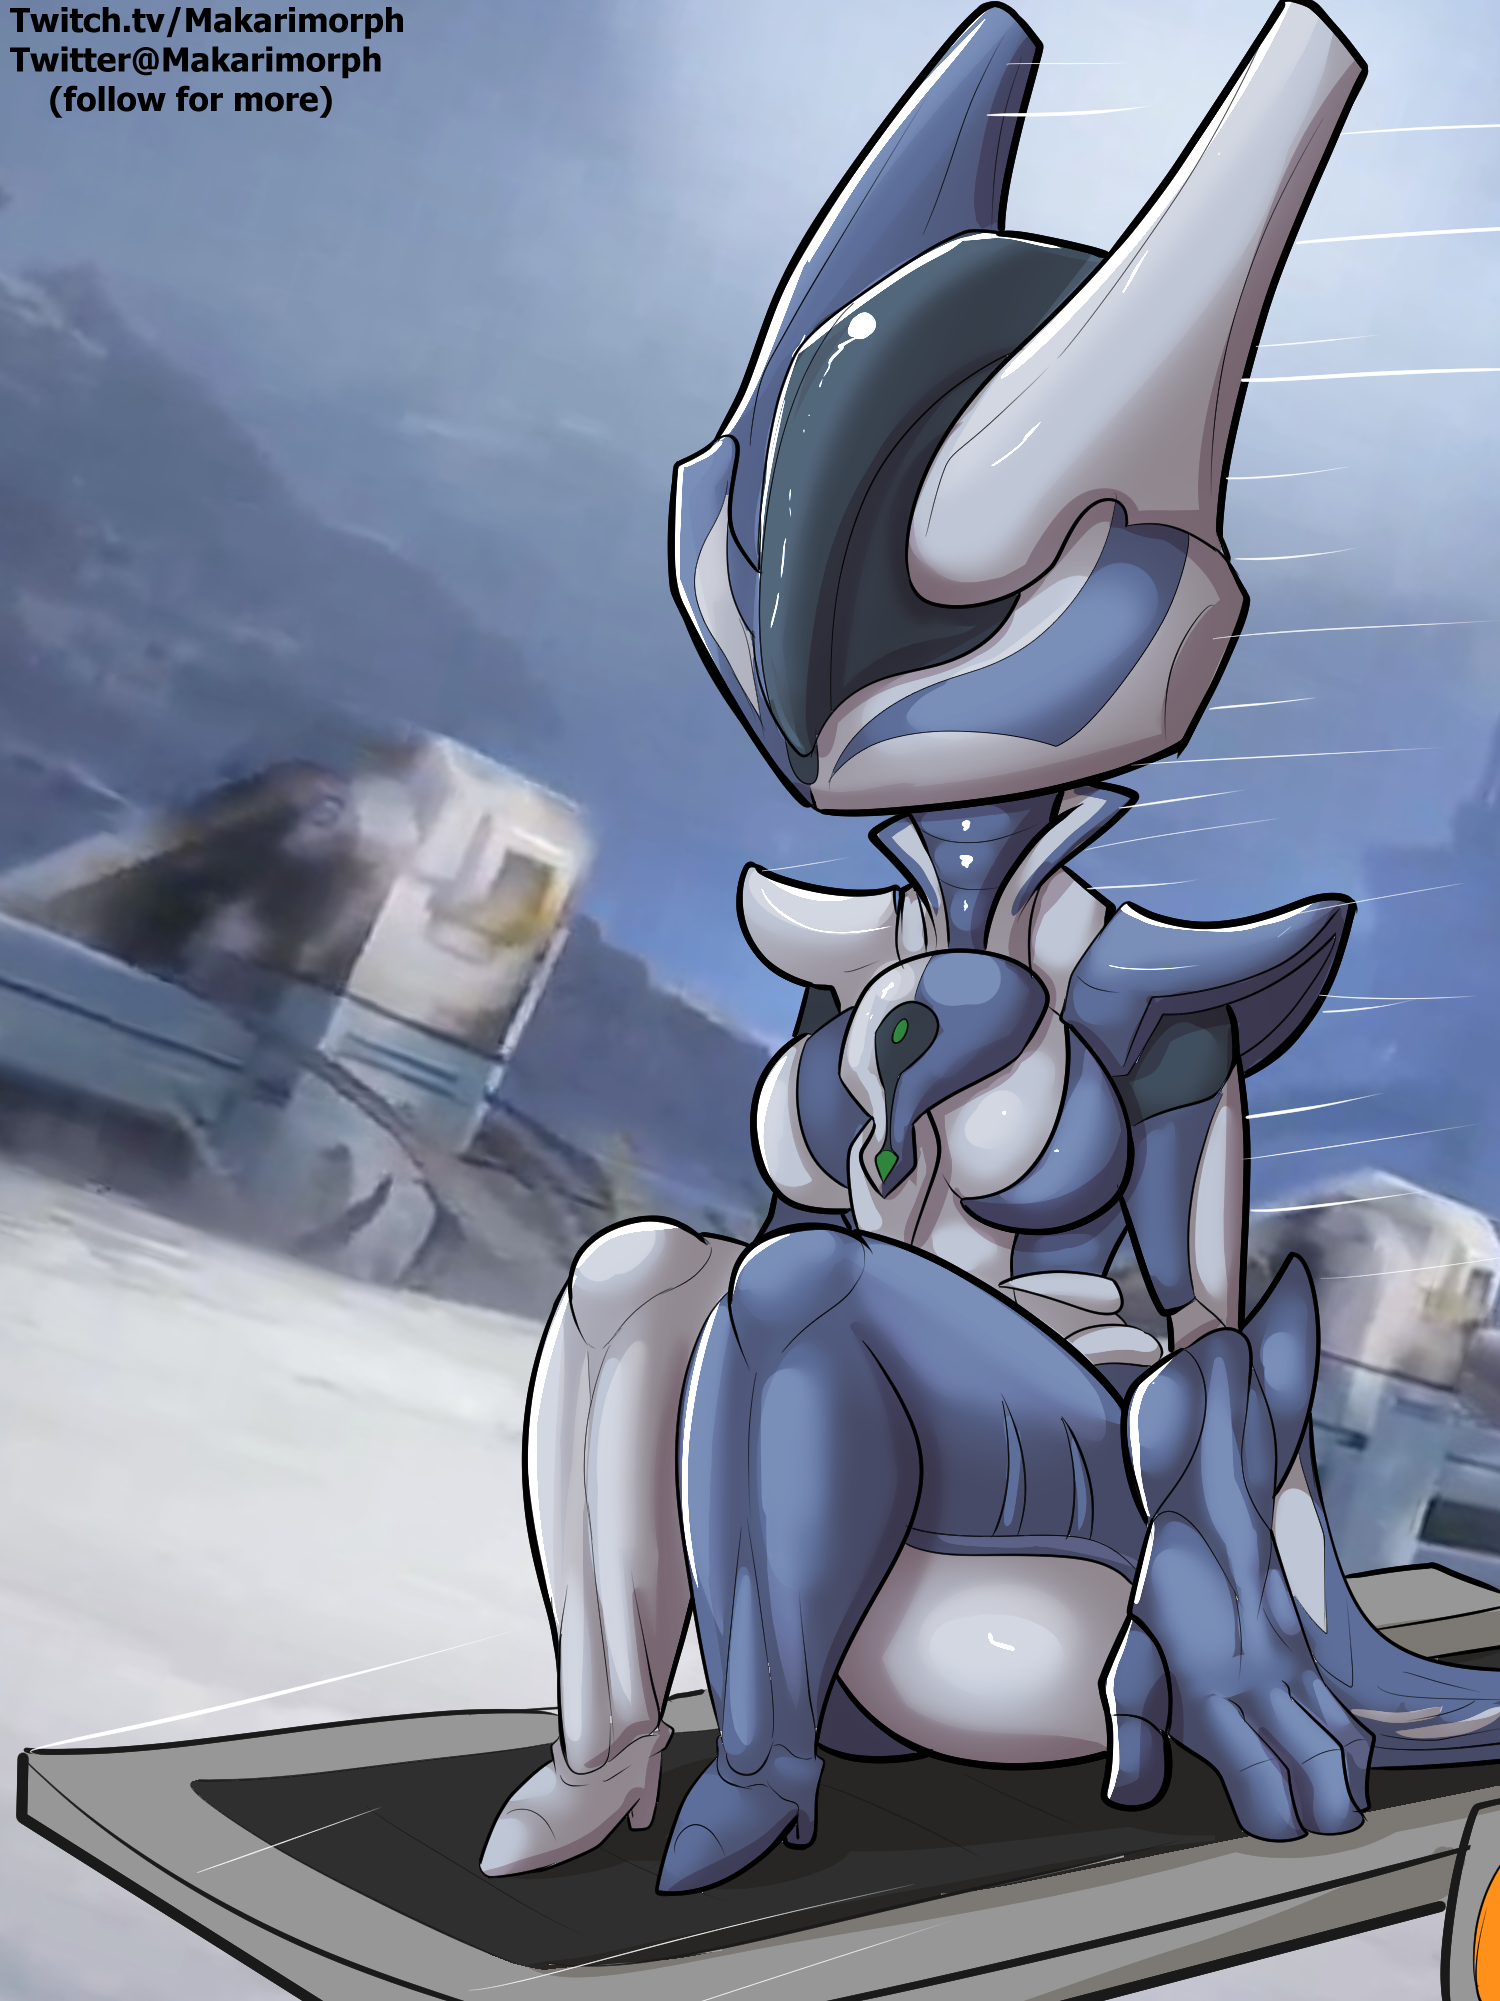 Cherry recommendet warframe thicc